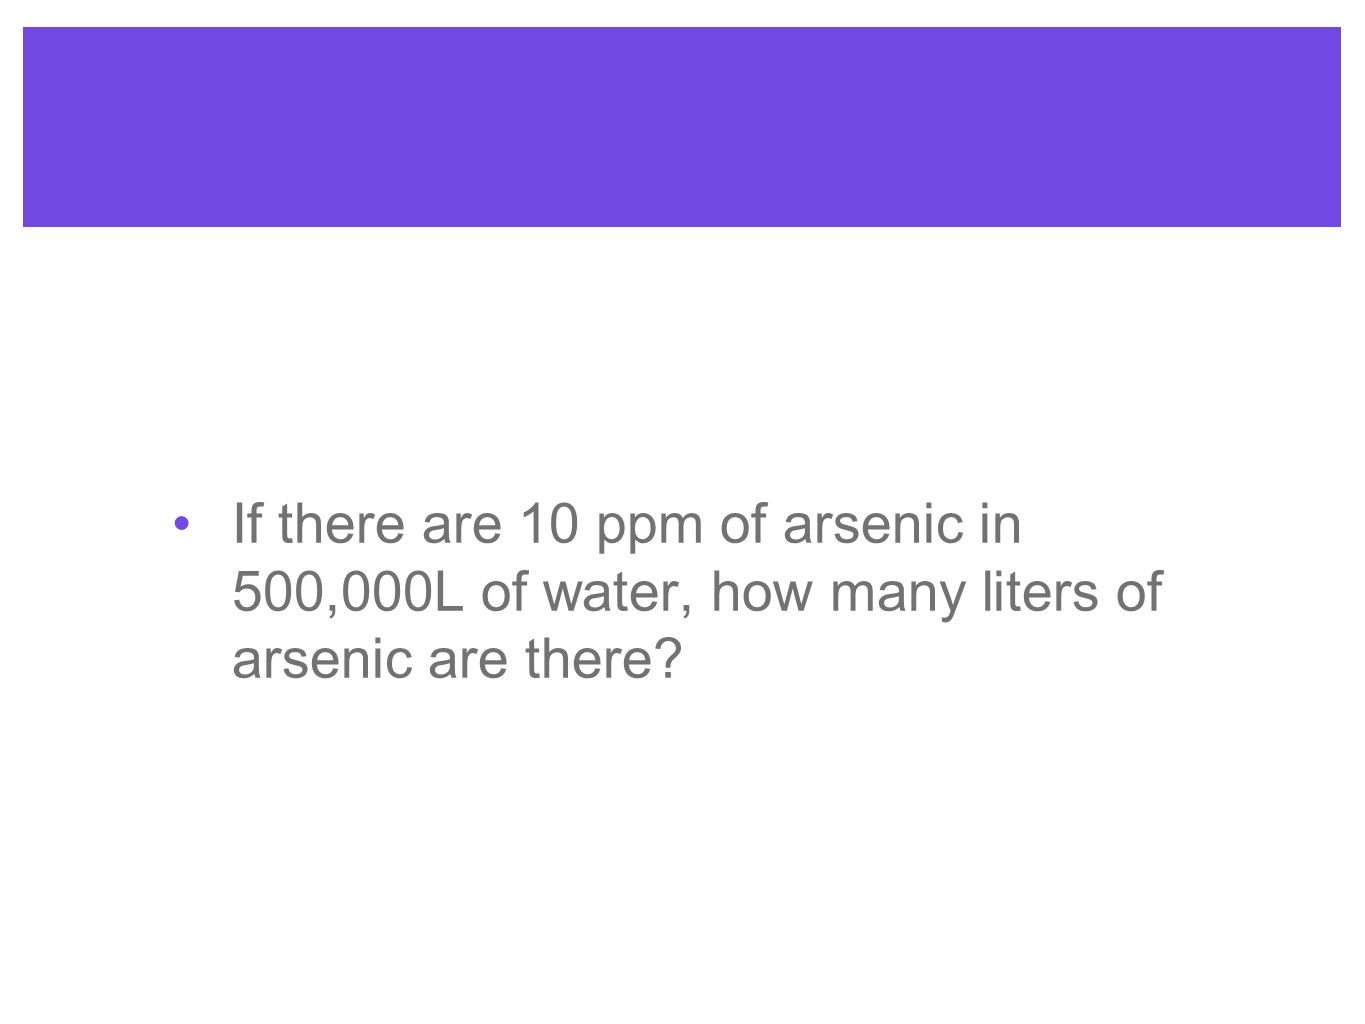 If there are 10 ppm of arsenic in 500,000L of water, how many liters of arsenic are there